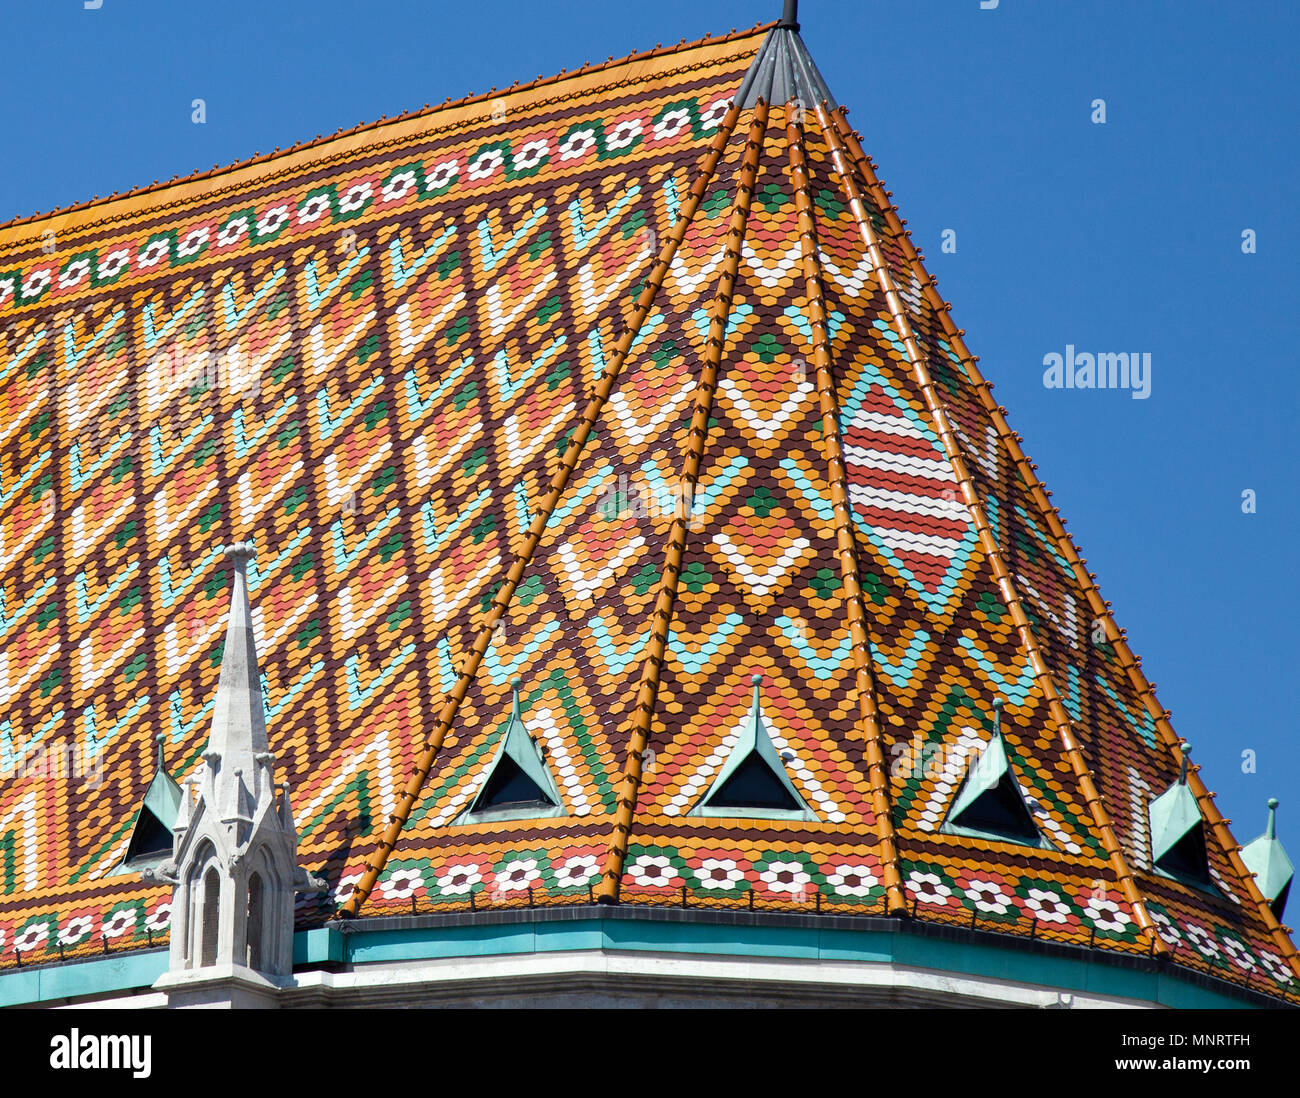 The ornate ceramic tile roof of the Matthias Church crowns the Fisherman's Bastion on Buda Hill, Budapest, Hungary. Stock Photo